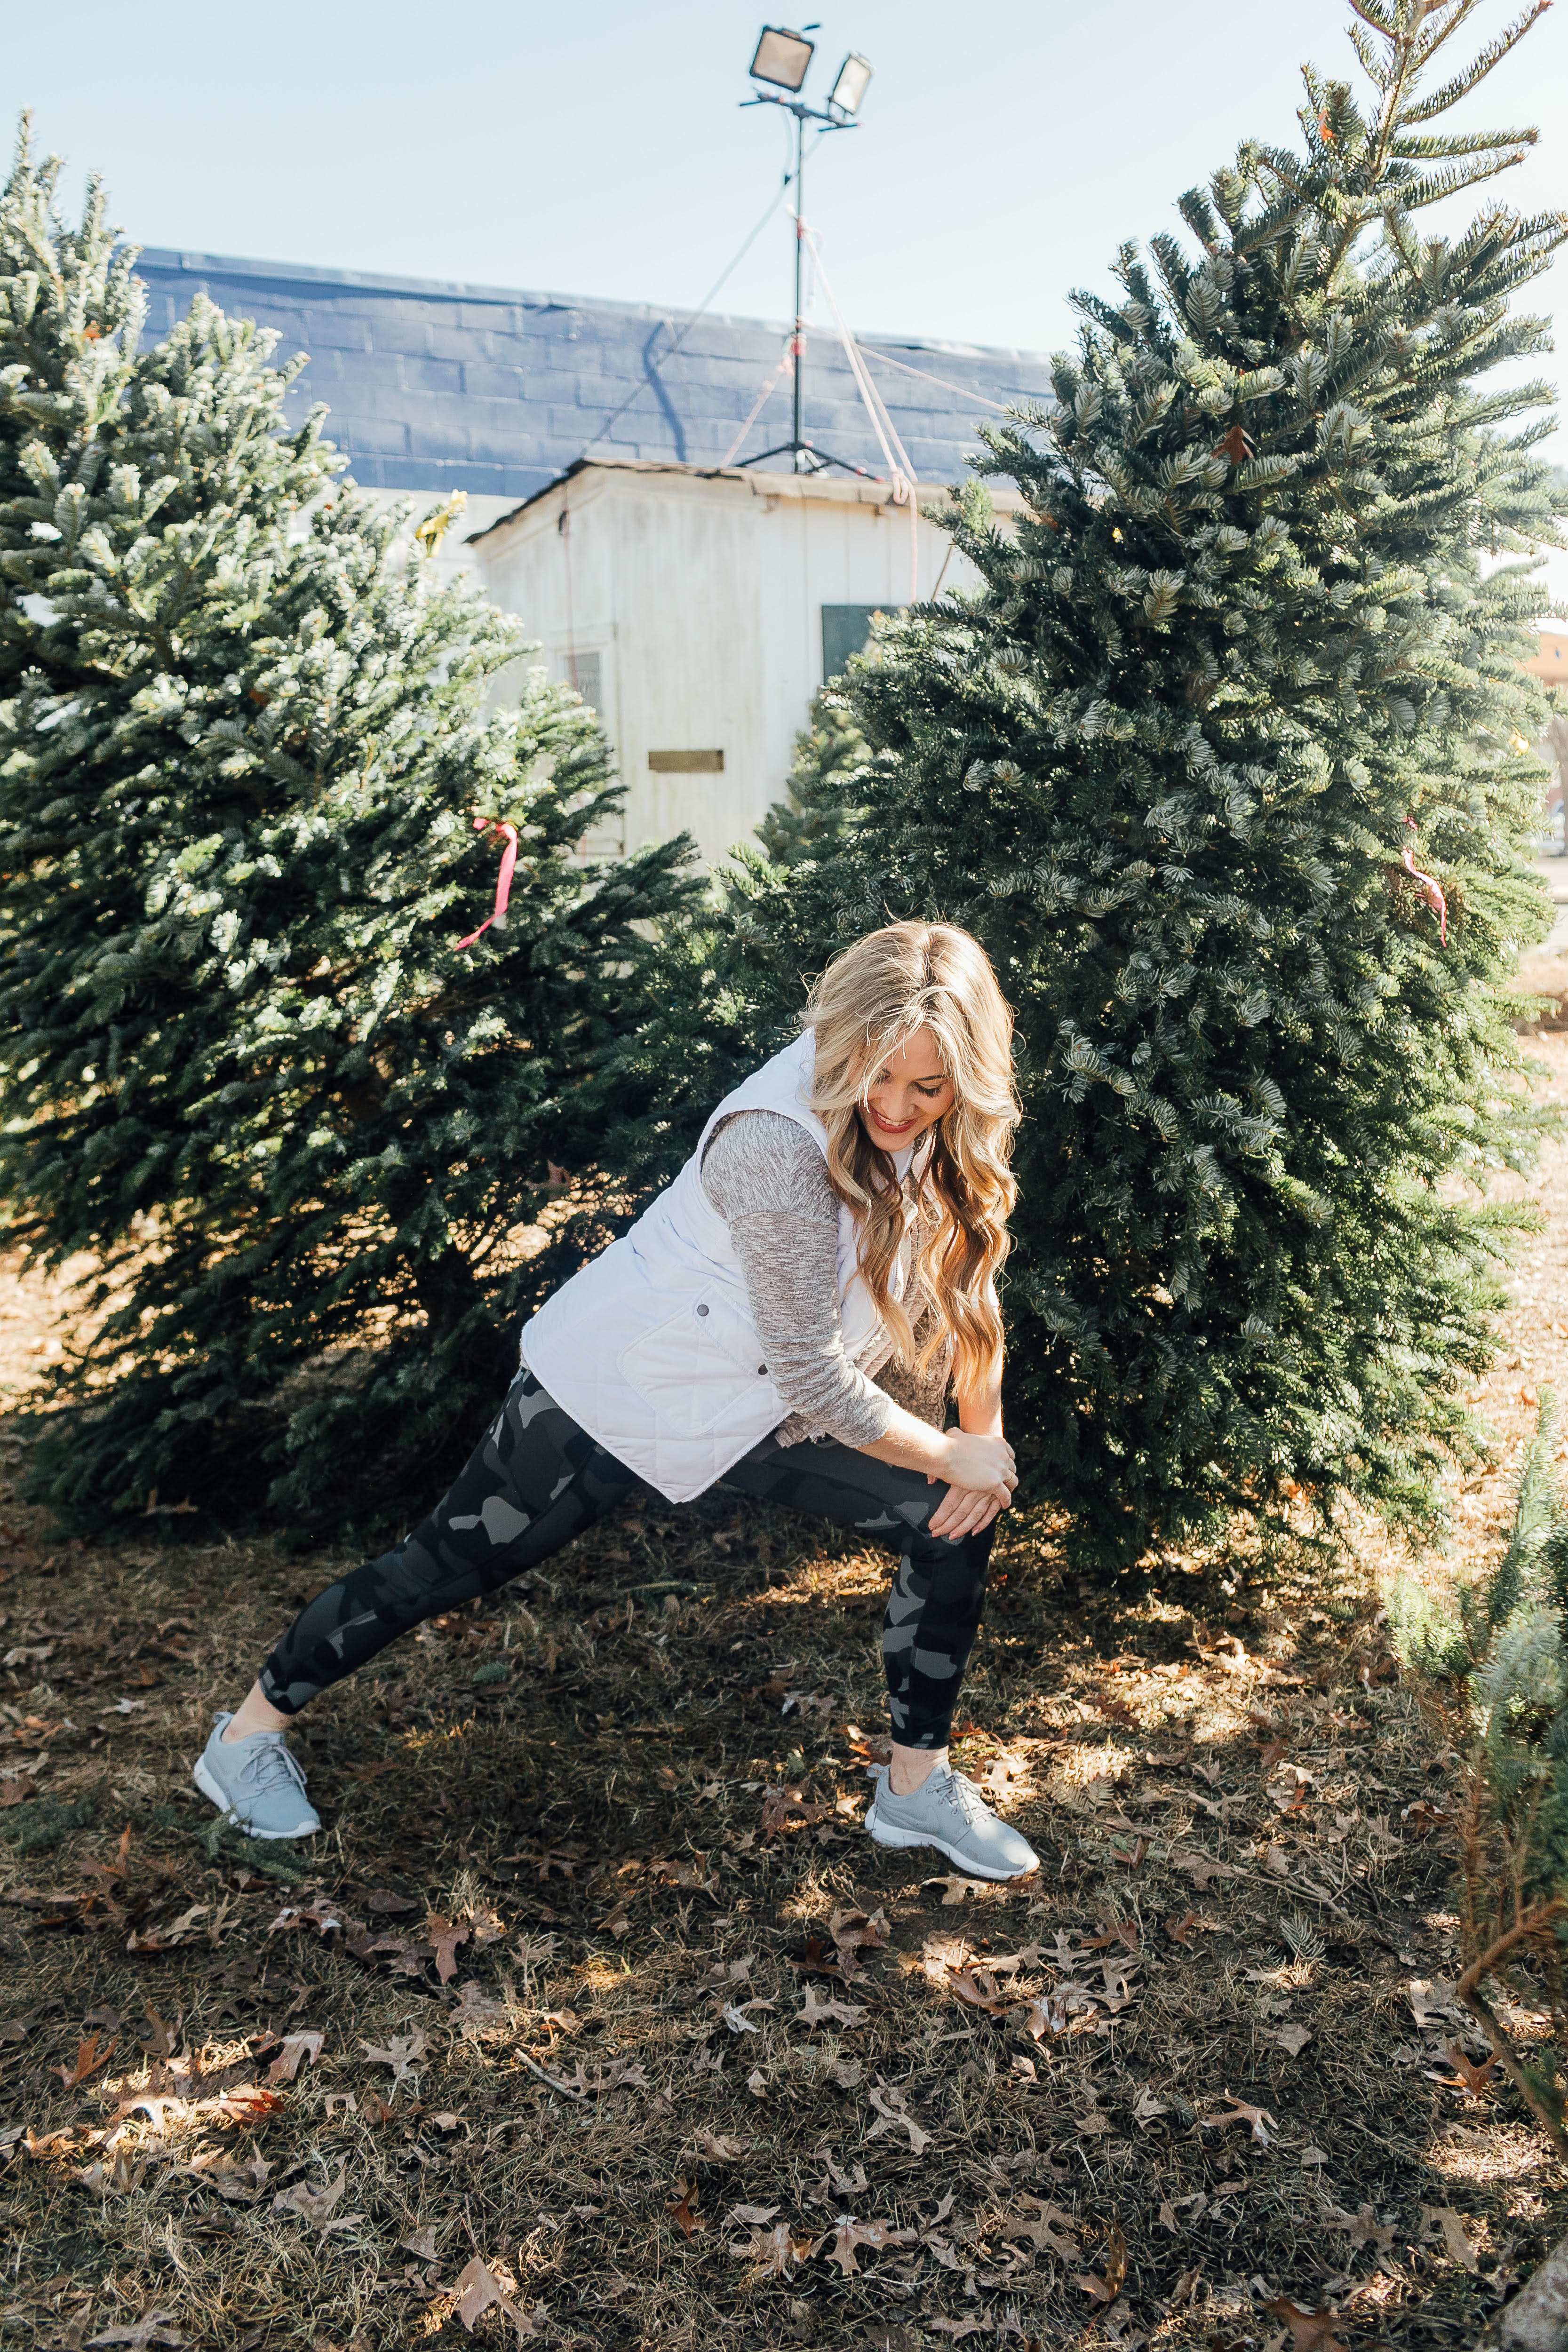 Full Abs Workout featured by top US fitness blog, Walking in Memphis in High Heels, as part of their Holiday Honey Hustle Challenge: image of a woman working out at a Christmas tree farm